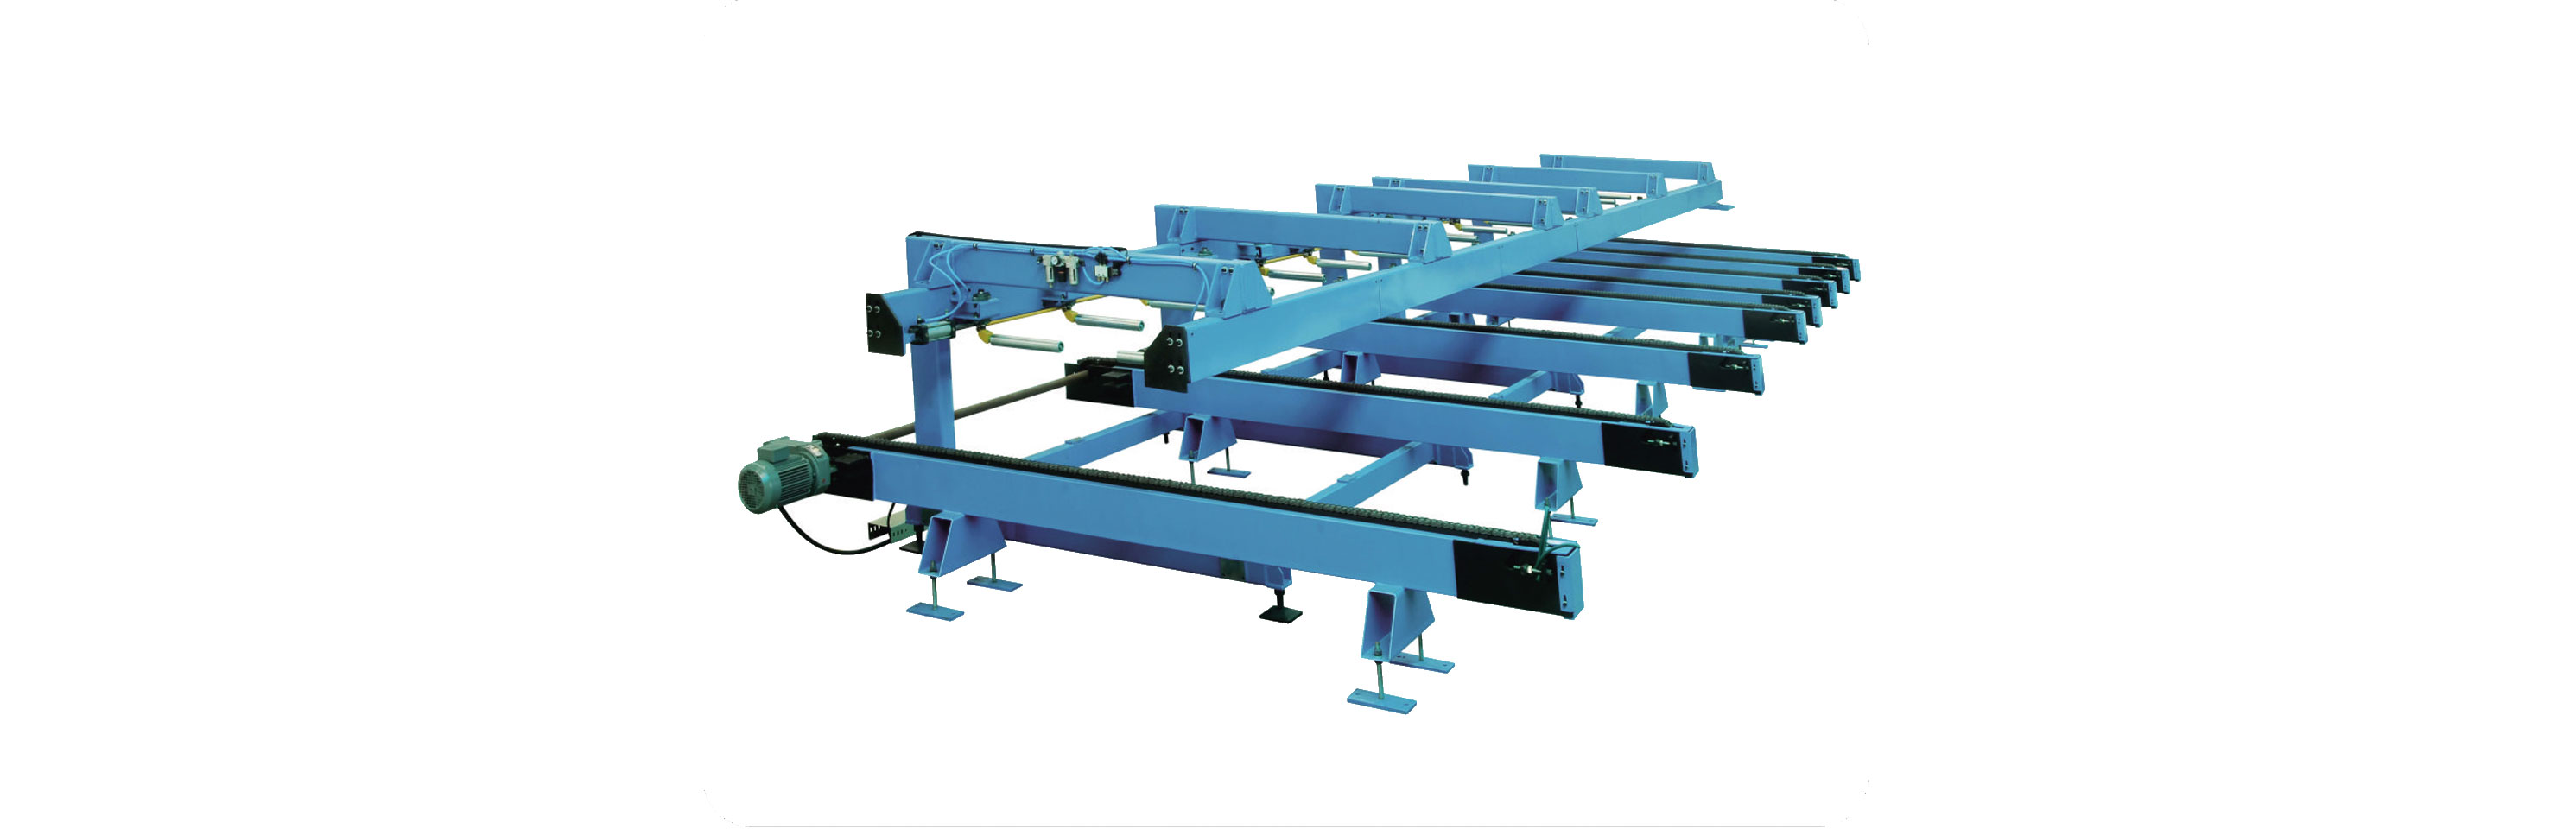 The Core Equipment of Automated Three-dimentional Warehouse: Stacker Crane